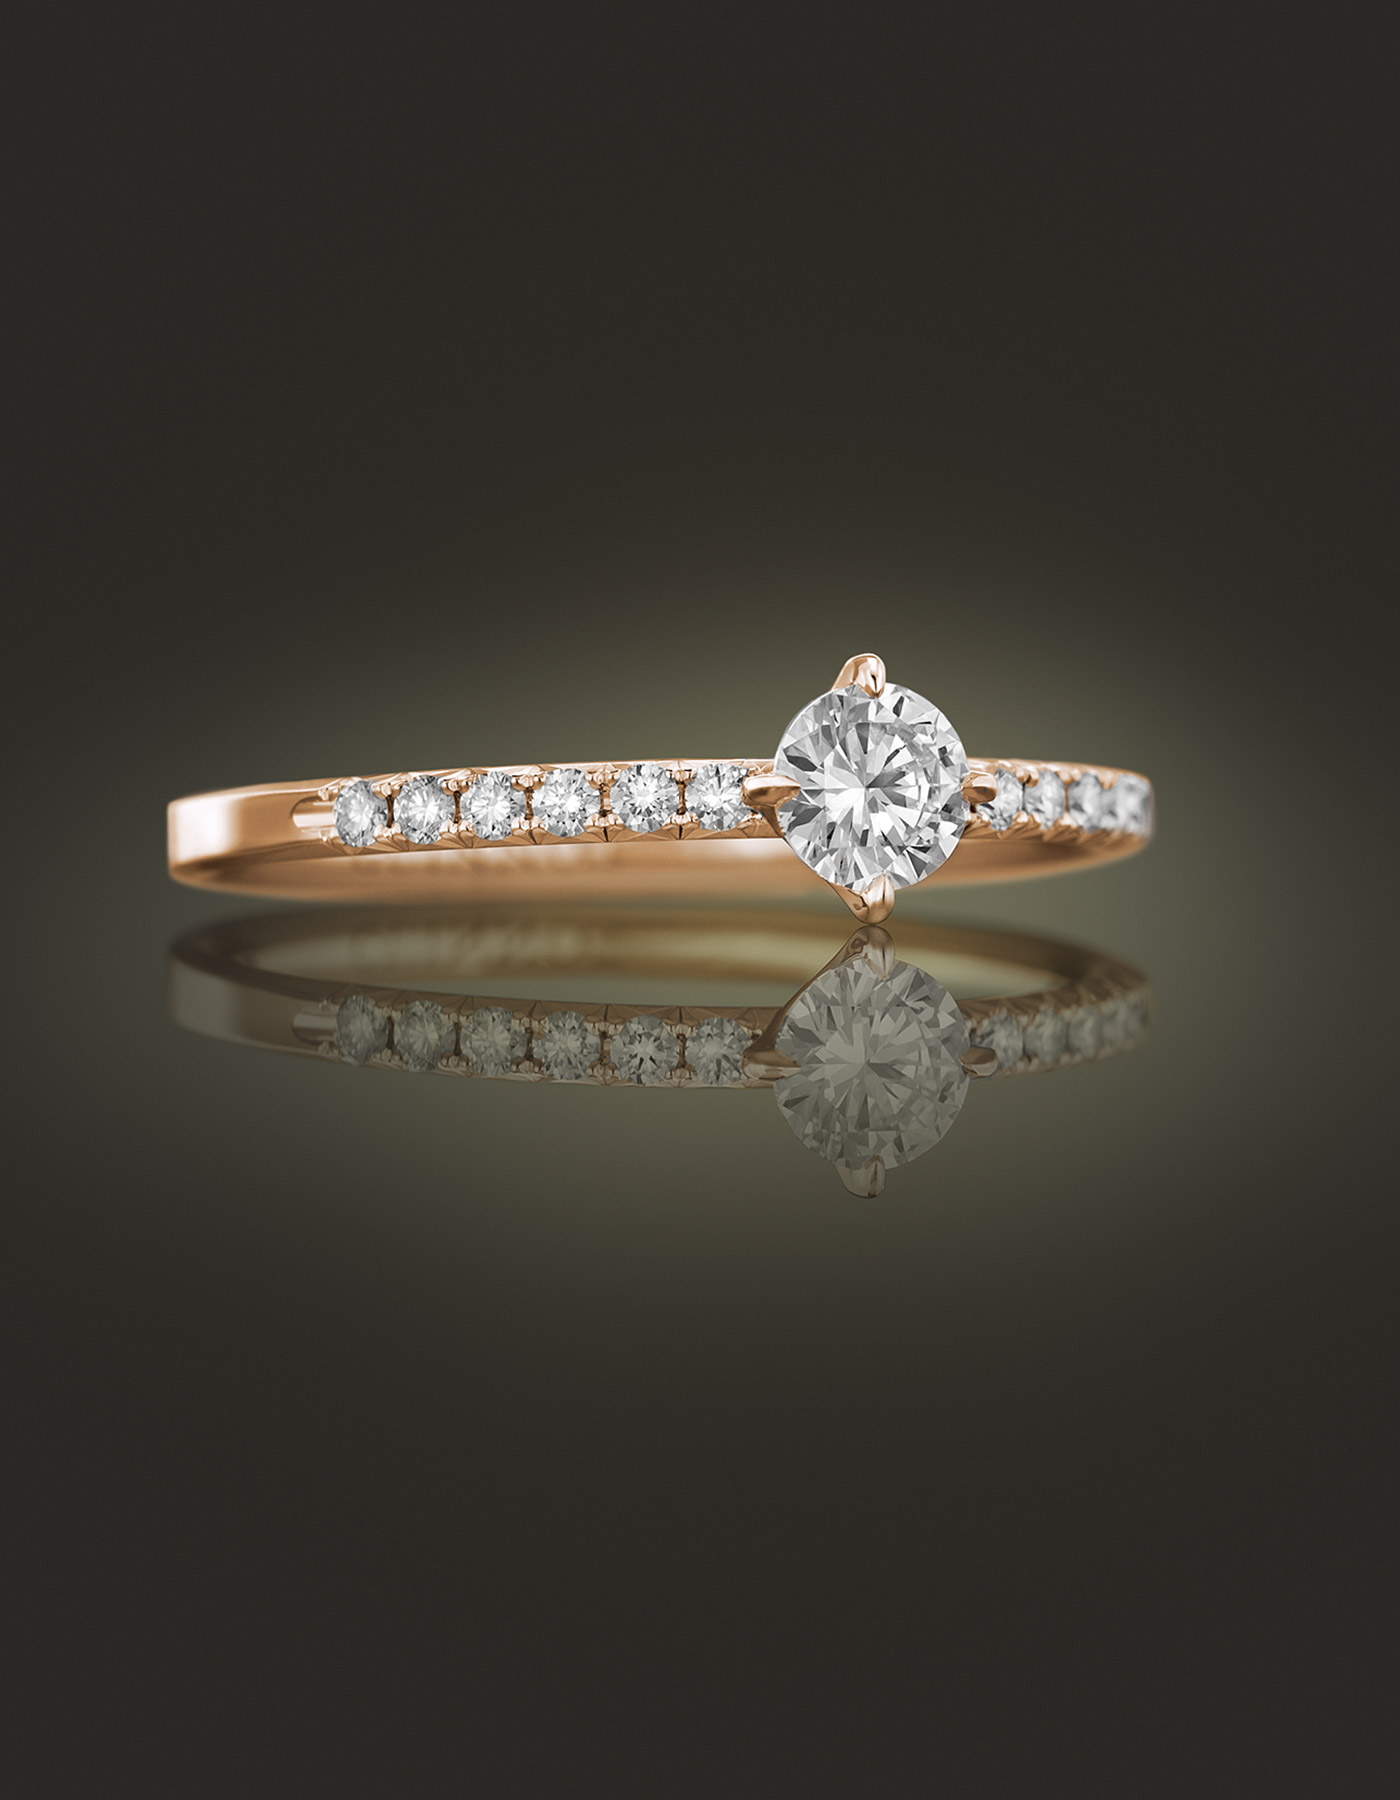 Guinnot Anonymous Solitaire diamond ring in 18k rose gold